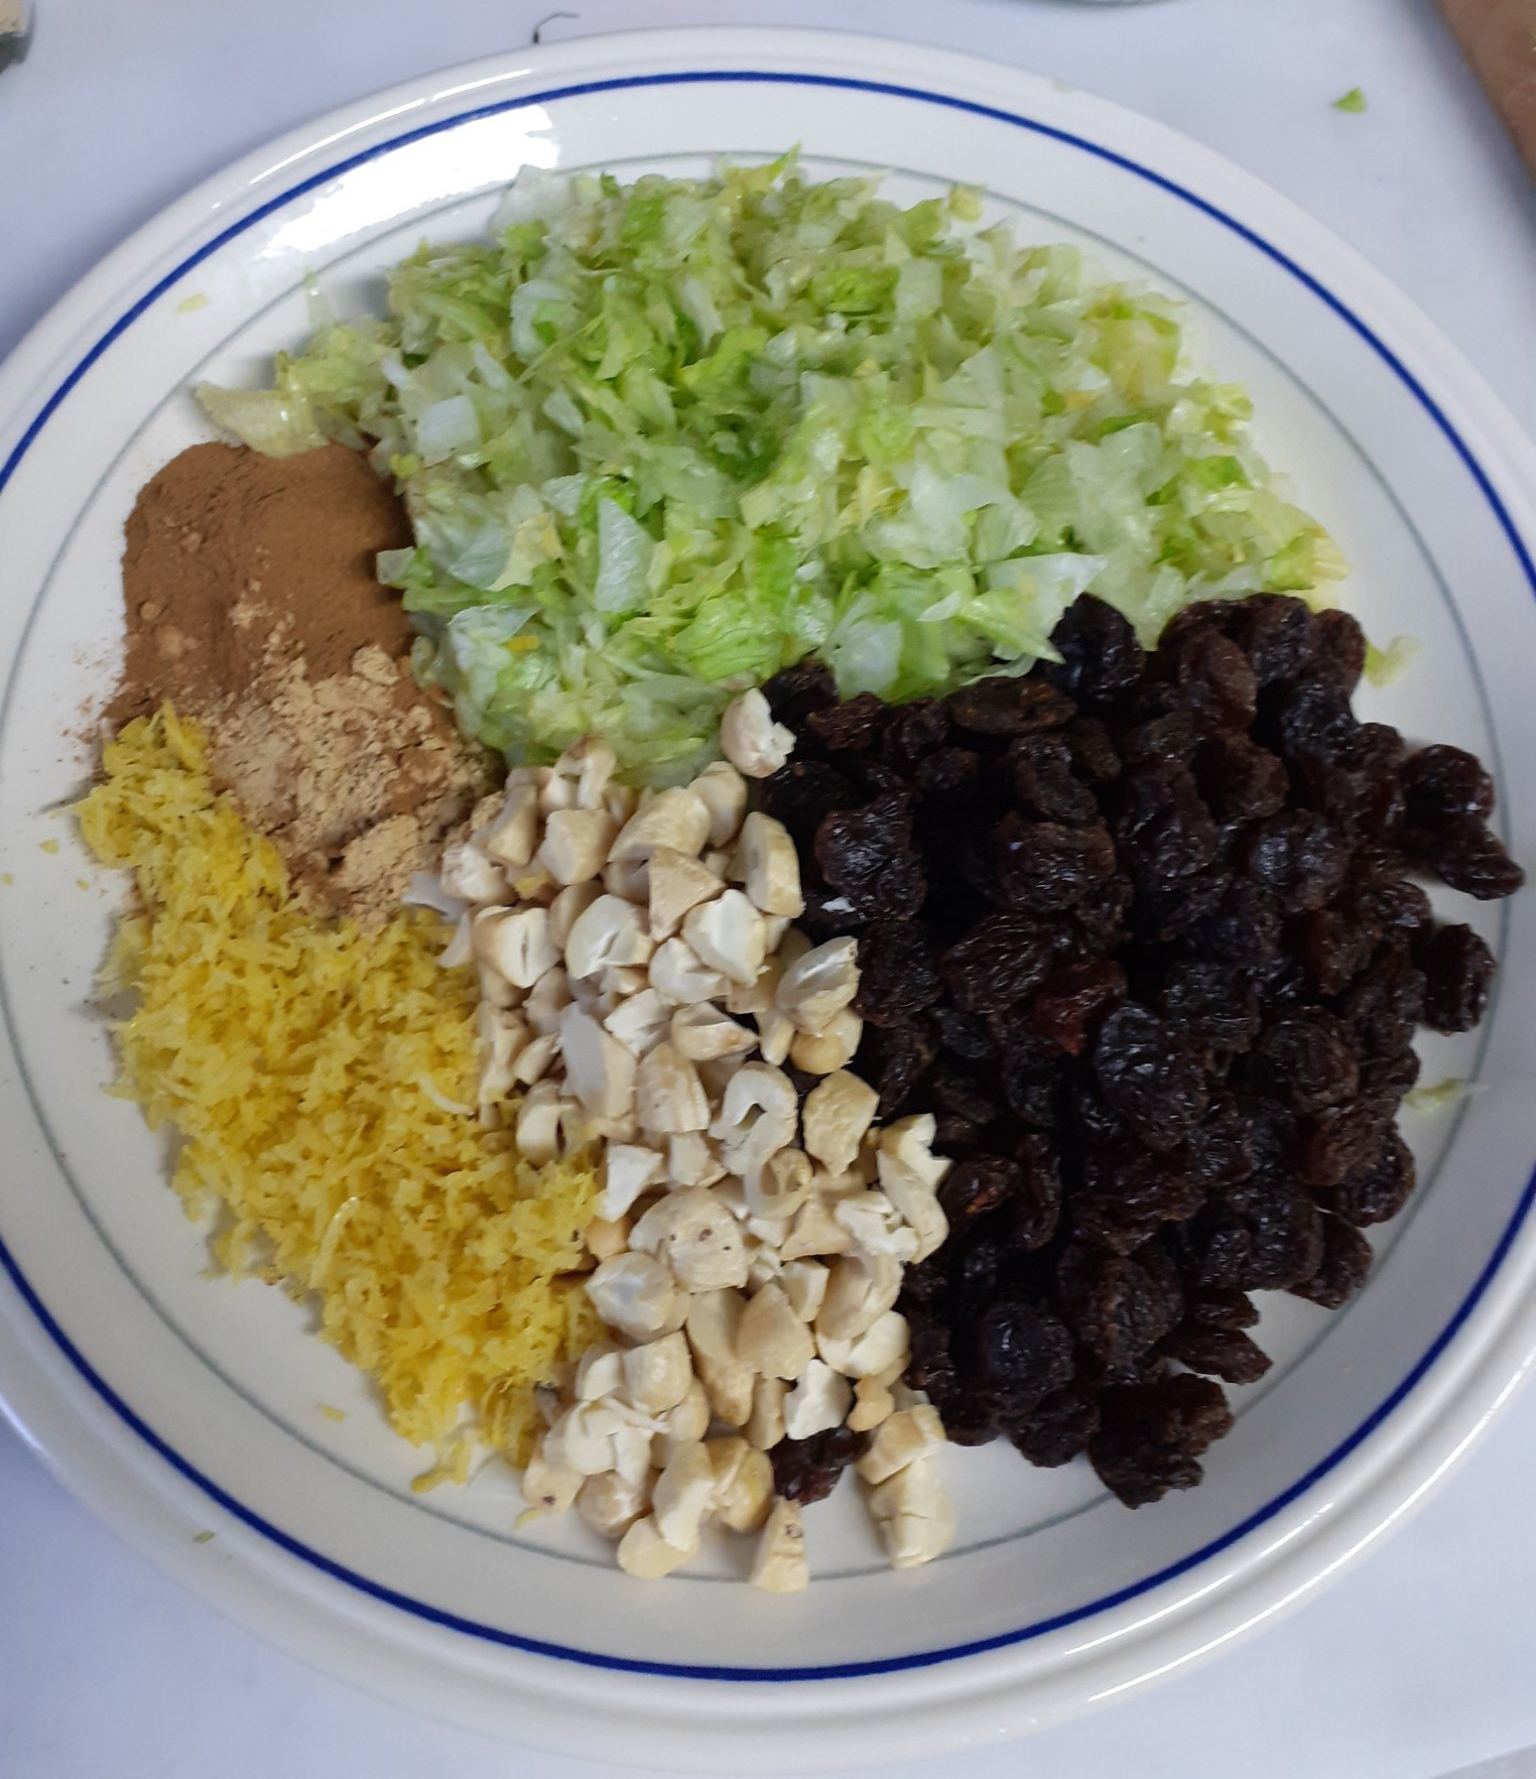 white plate with thin blue band around edge, with fresh green chopped lettuce, raisins, chopped cashews, zest and juice of lemon, ginger and cinnamon - on white worktop